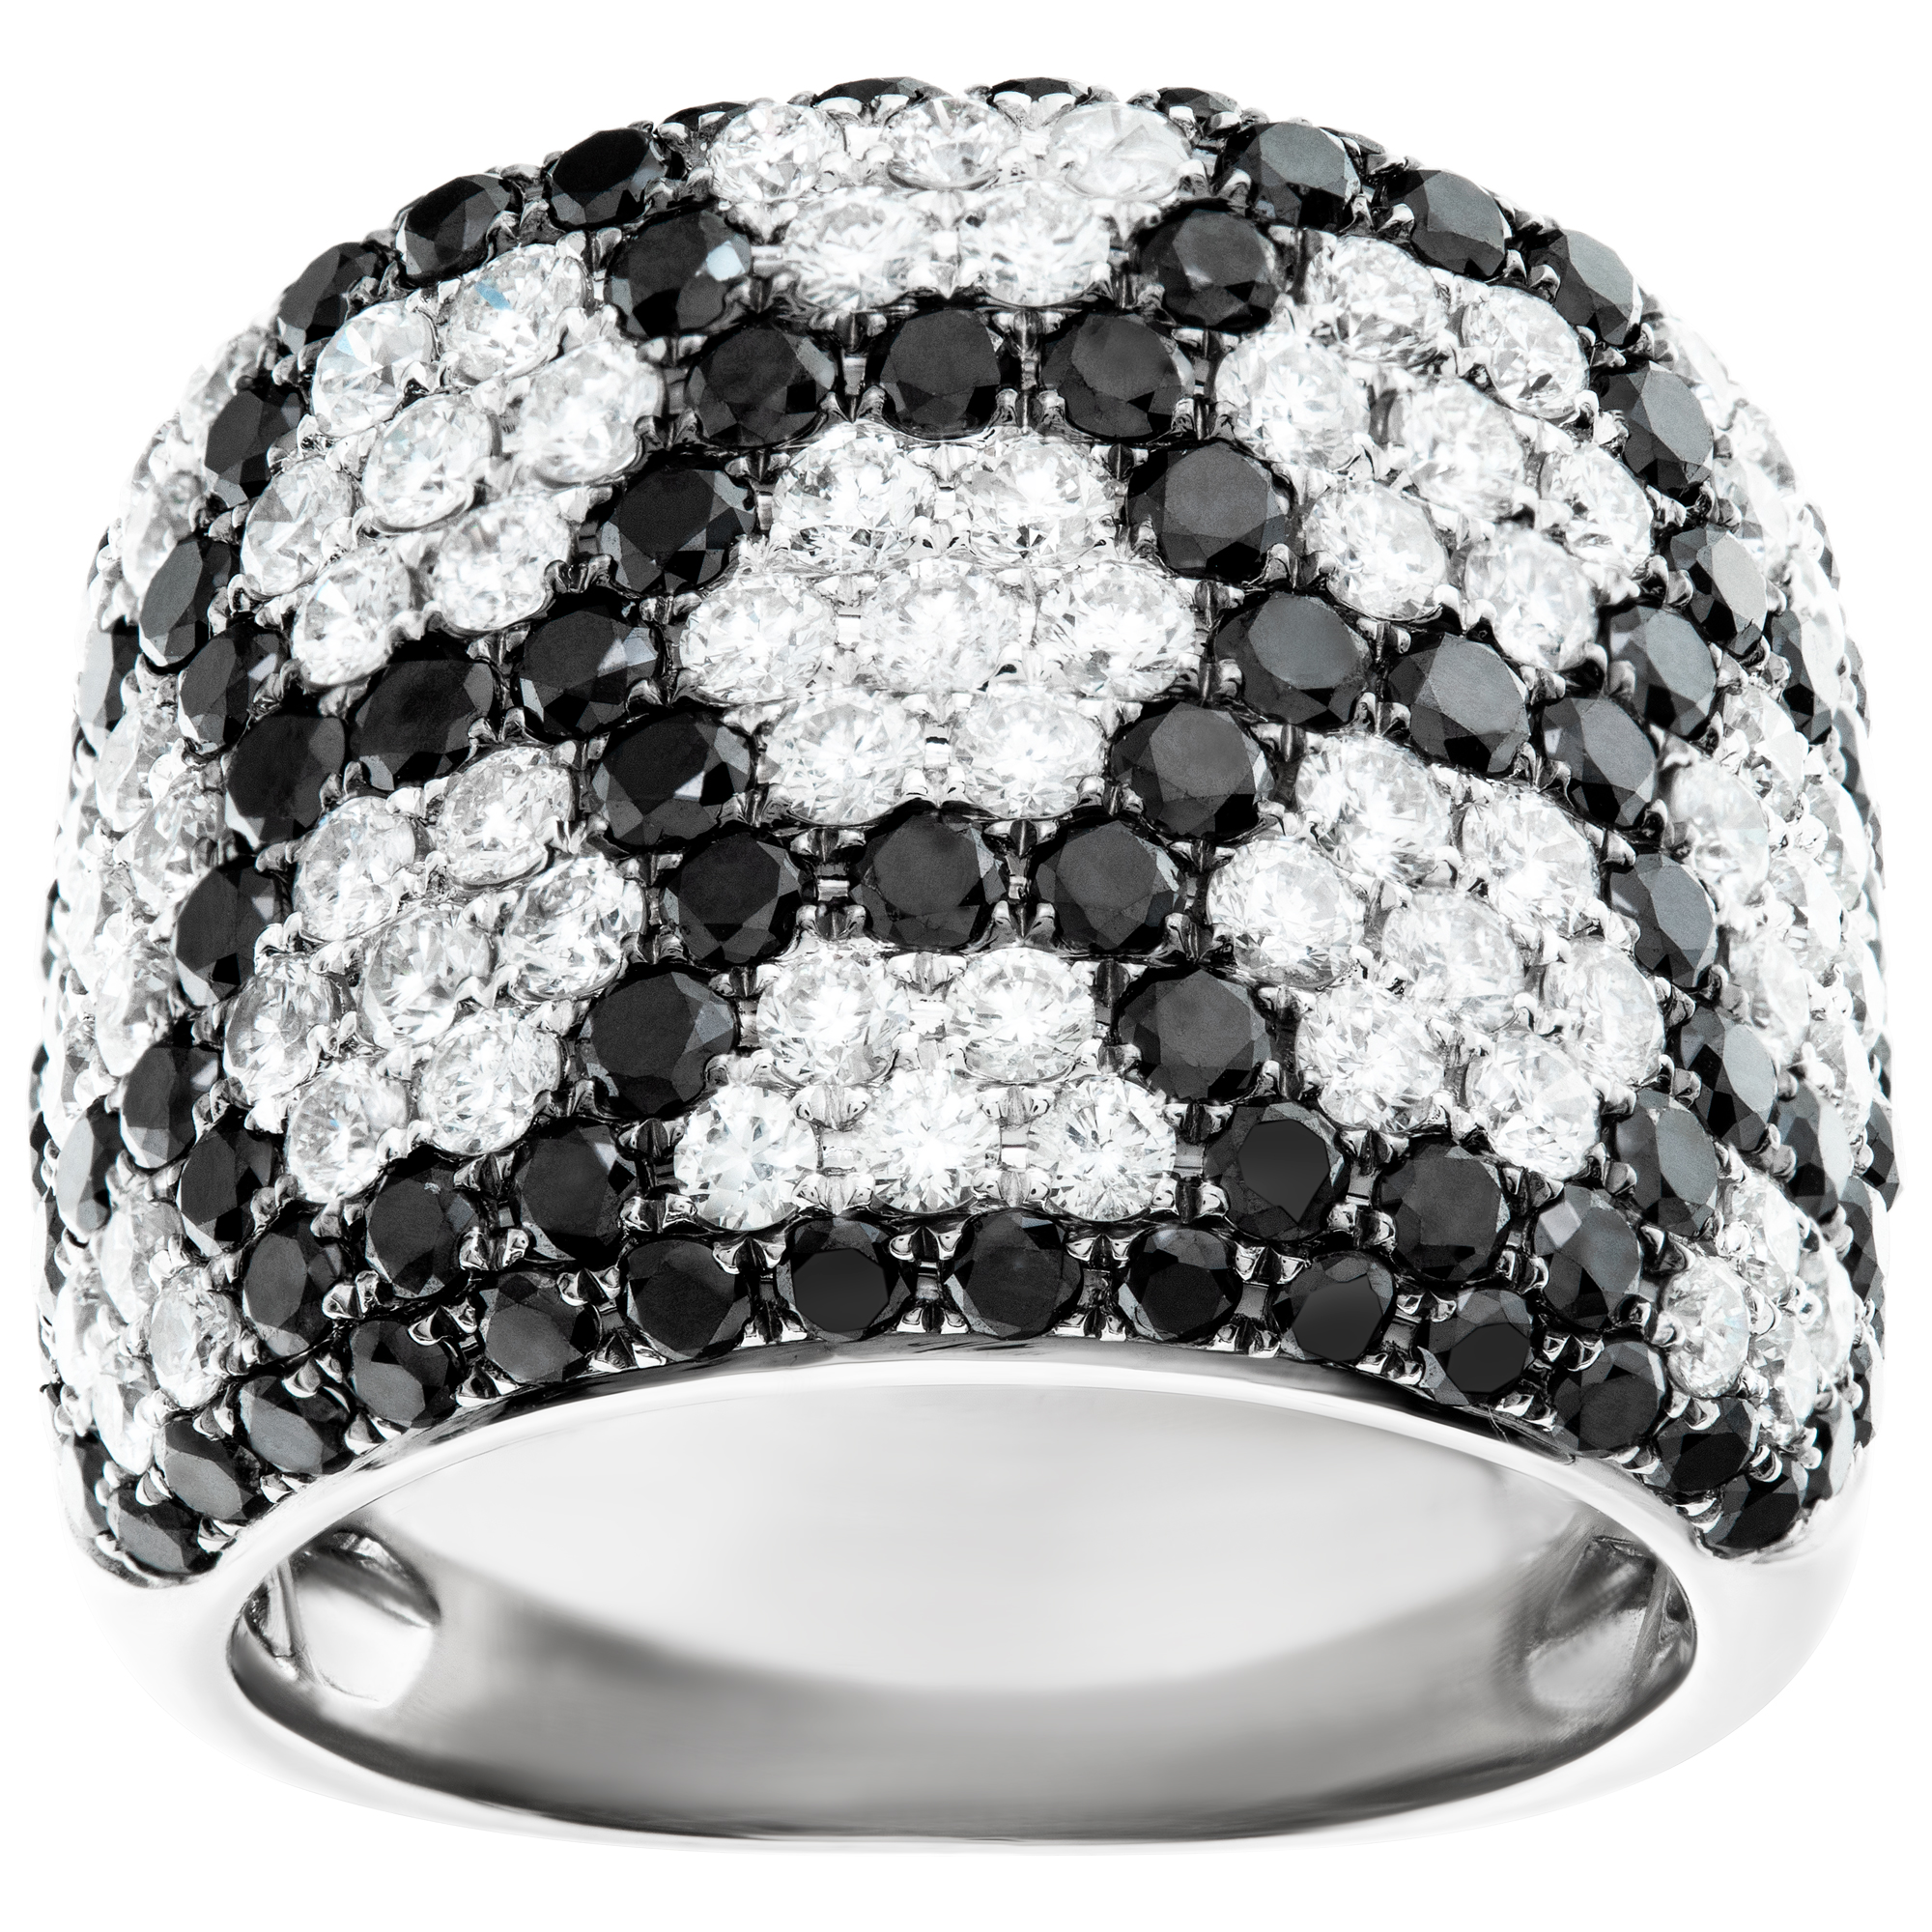 White & black diamonds ring set in 18K white gold. Total diamonds approx weight 3.00 carats Size 5.